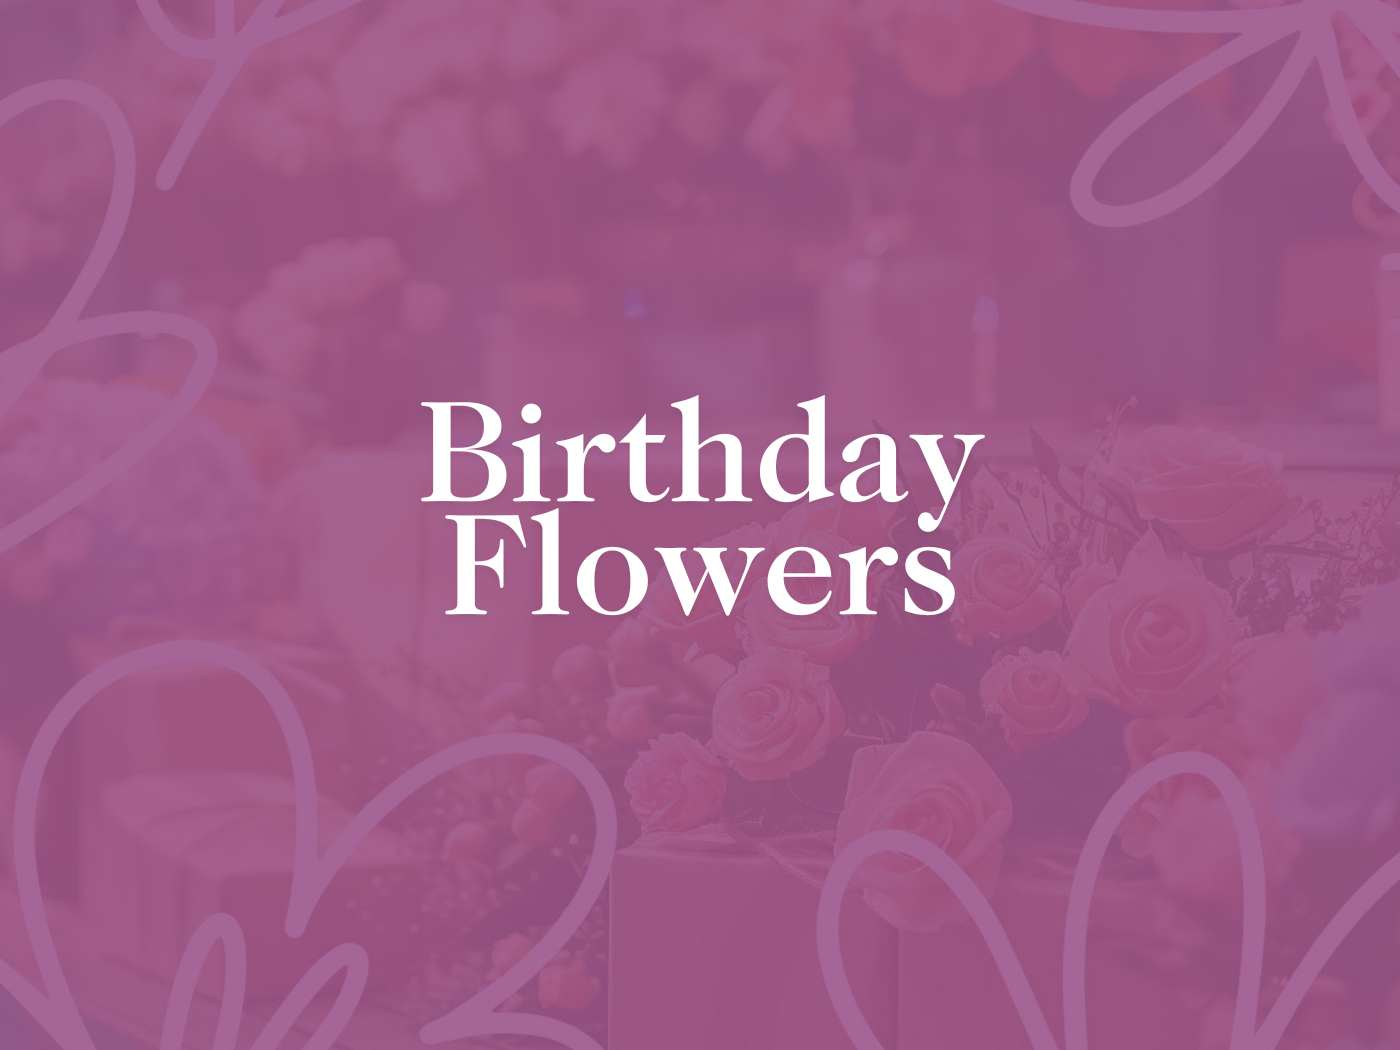 Elegant Birthday Flowers banner in shades of purple with a blurred background of assorted blooms, perfect for gifting from the Fabulous Flowers and Gifts collection.